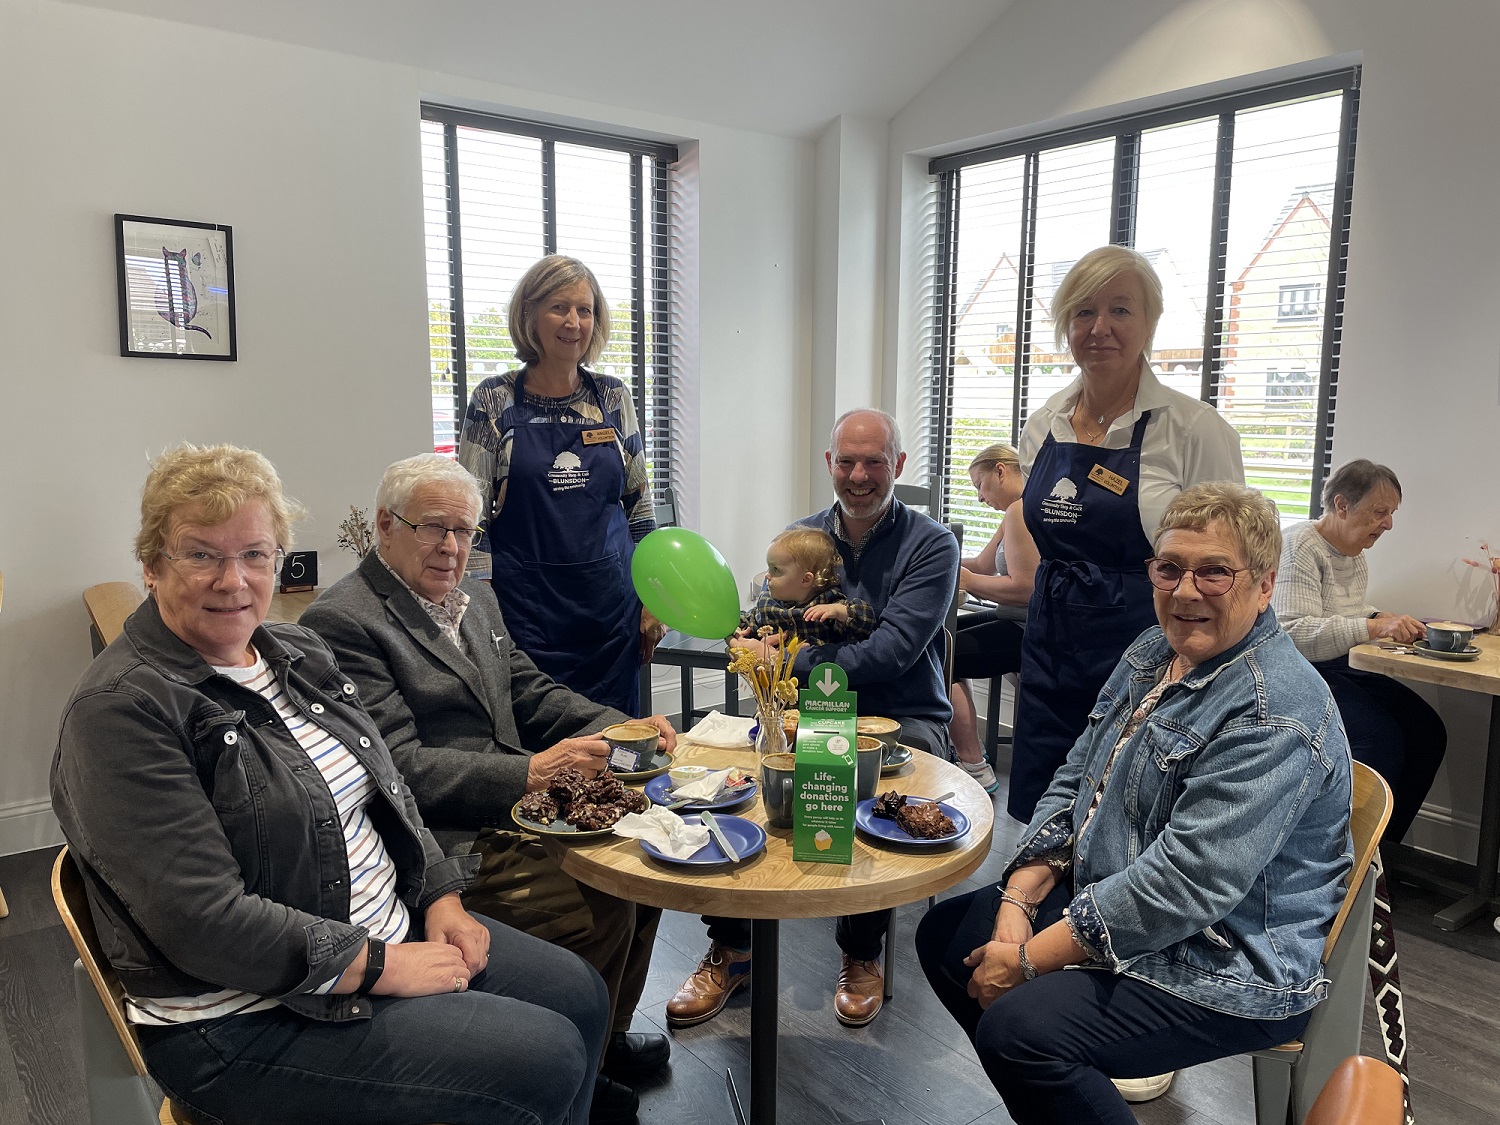 Justin Joins Blunsdon Community For Macmillan Coffee Morning